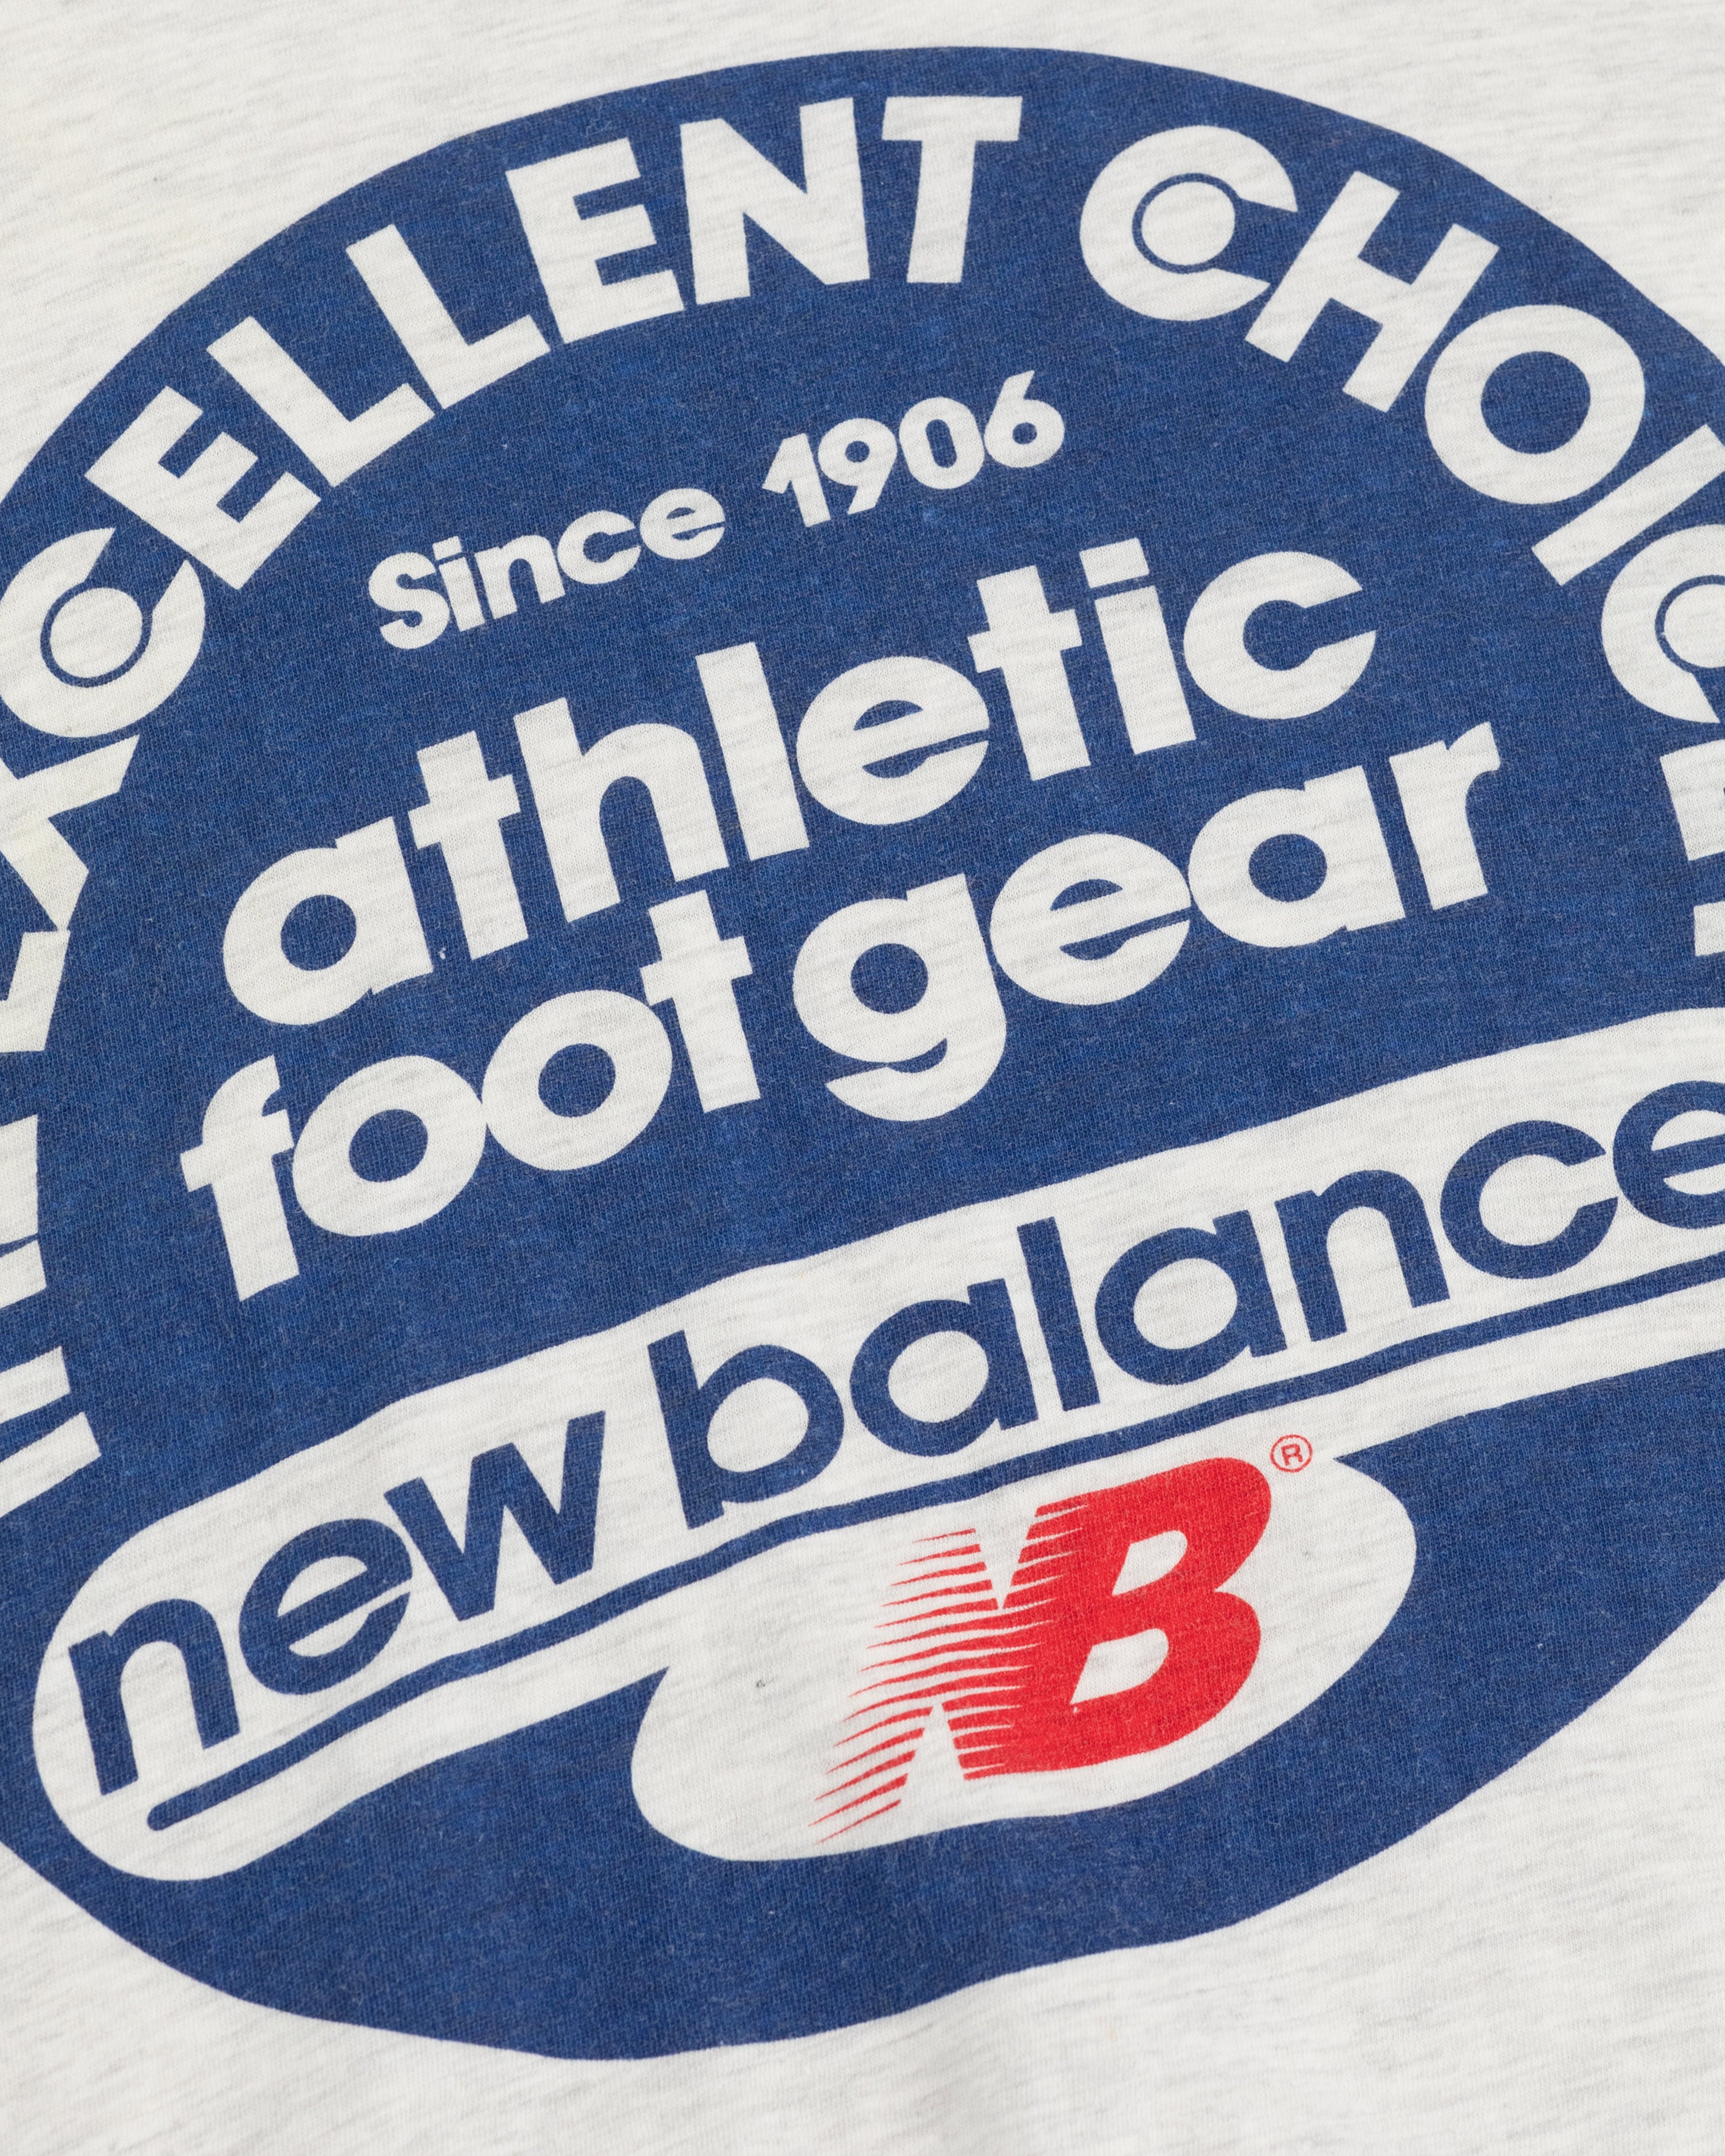 Vintage NB "The Excellent Choice" Tee